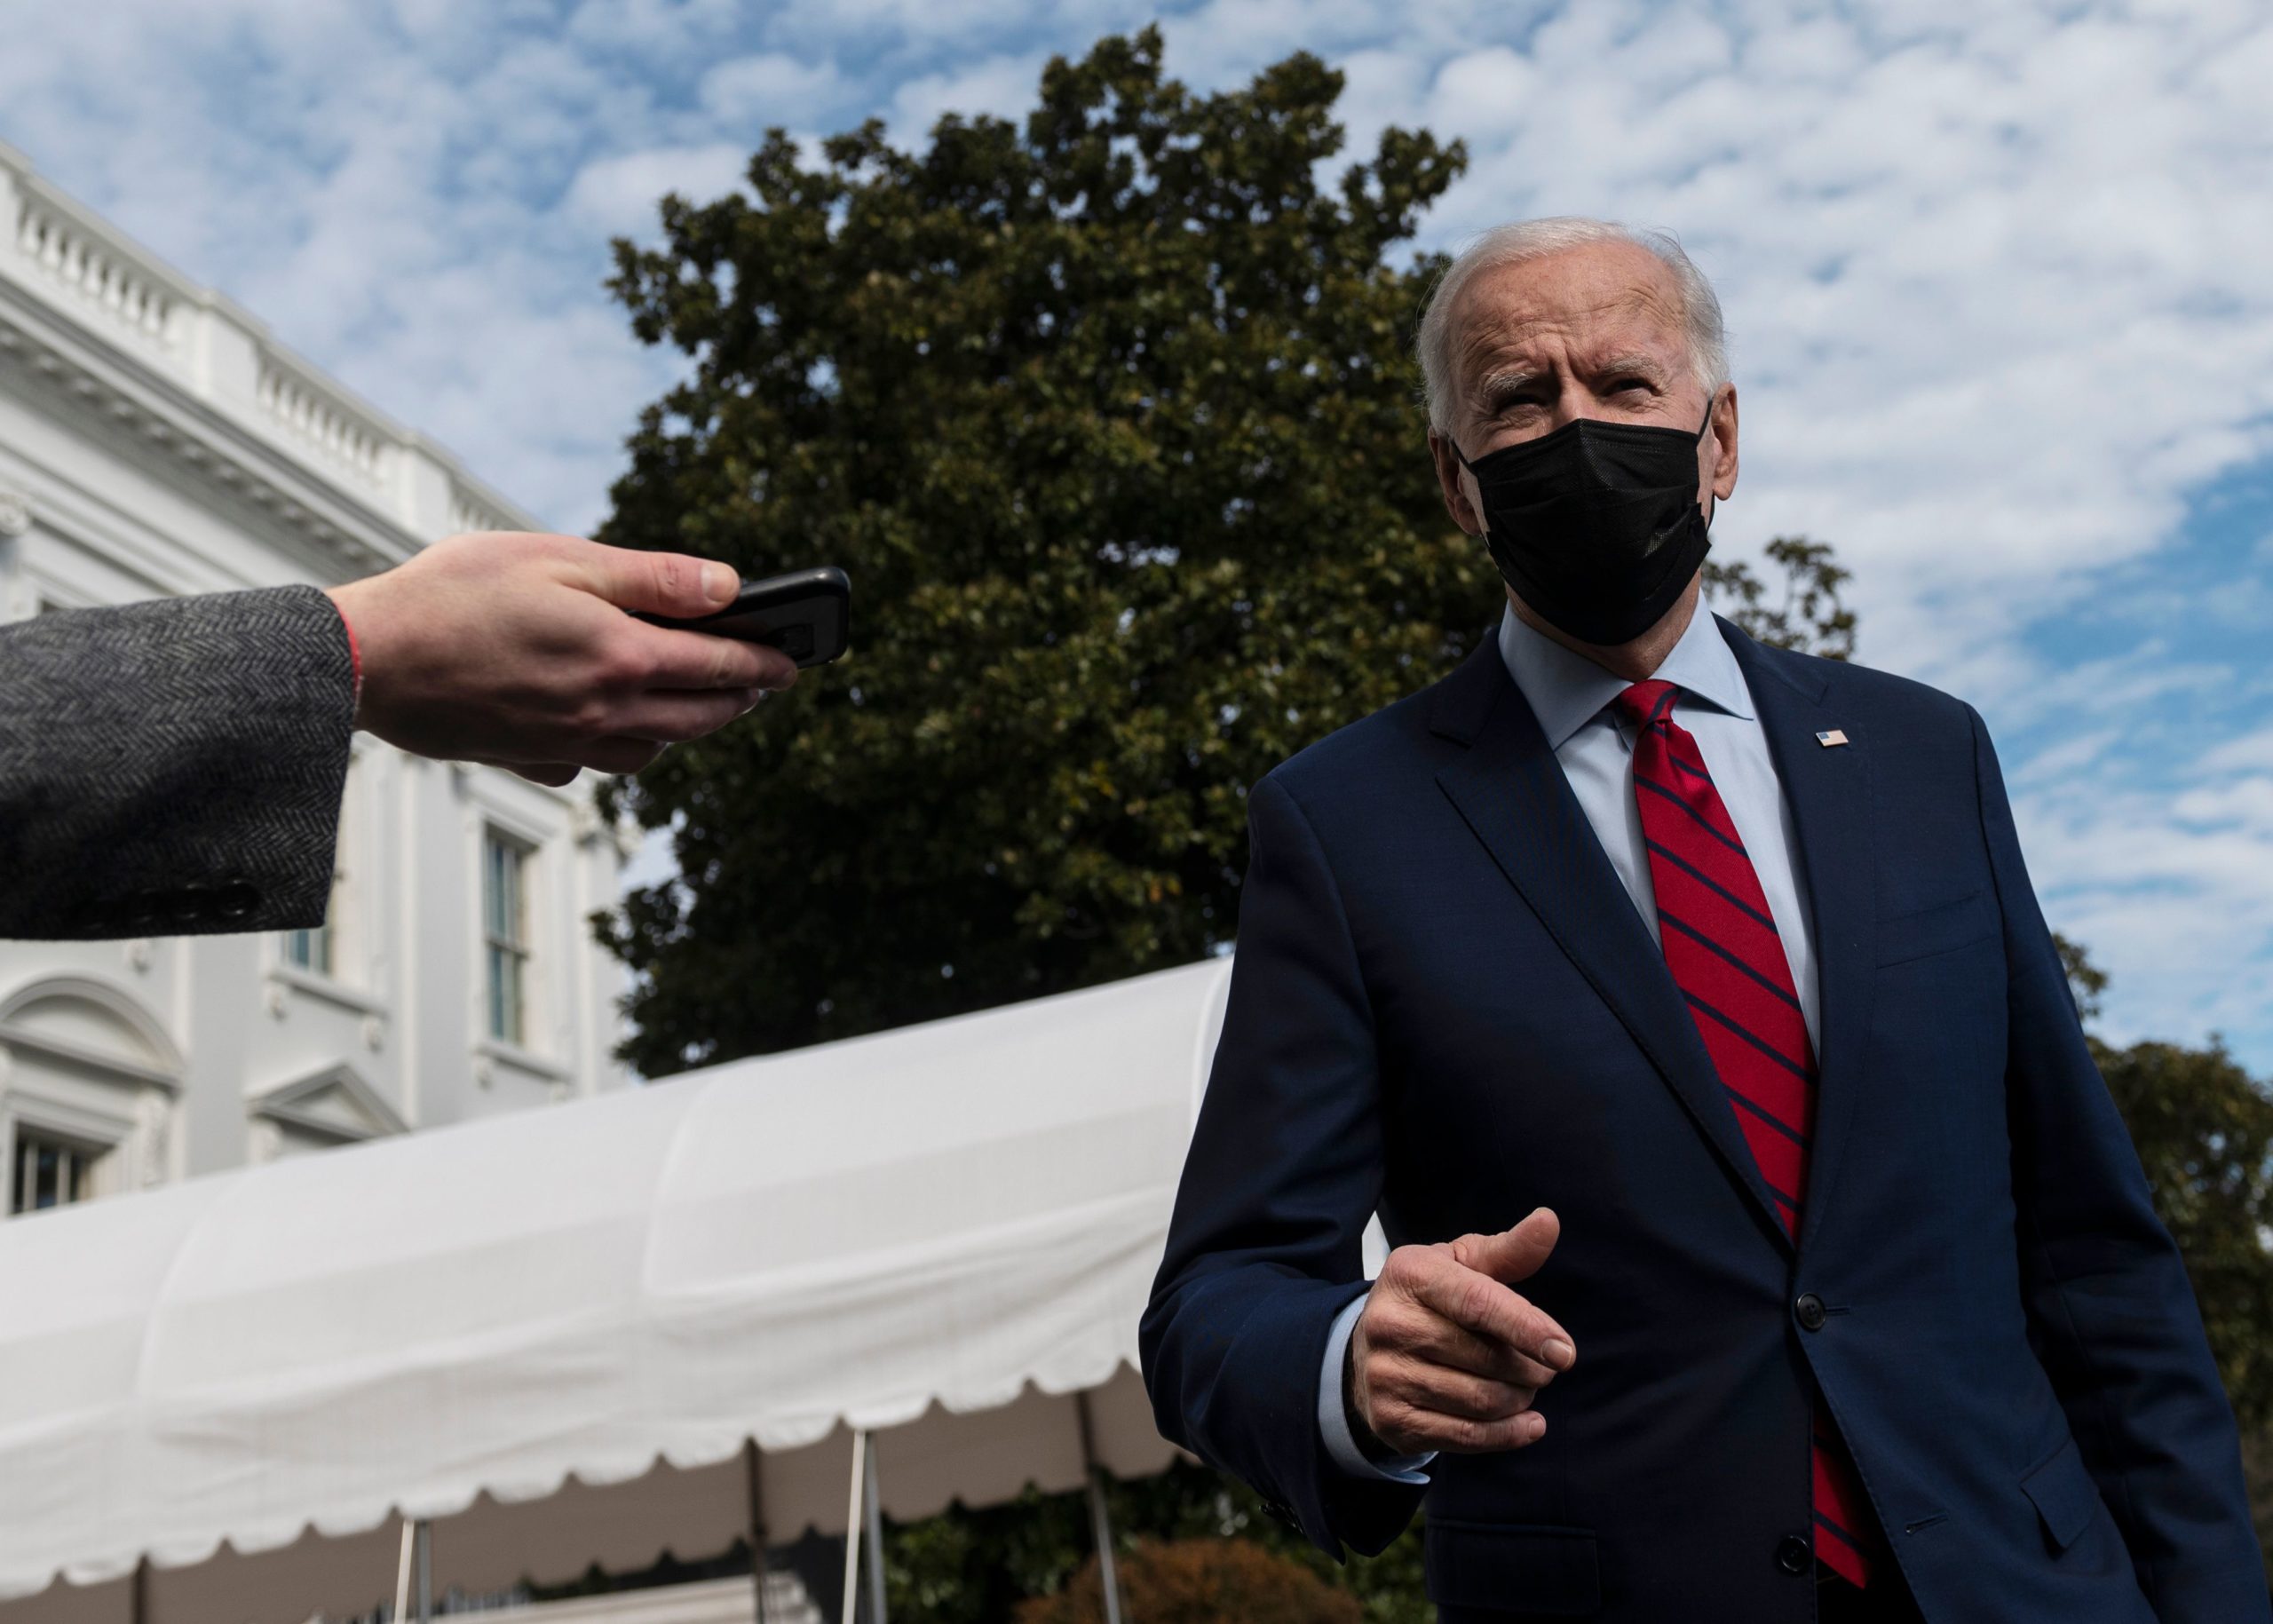 US President Joe Biden speaks to reporters as he departs for Wilmington, Delaware, from the South Lawn of the White House in Washington, DC, on February 27, 2021. (Photo by ANDREW CABALLERO-REYNOLDS/AFP via Getty Images)